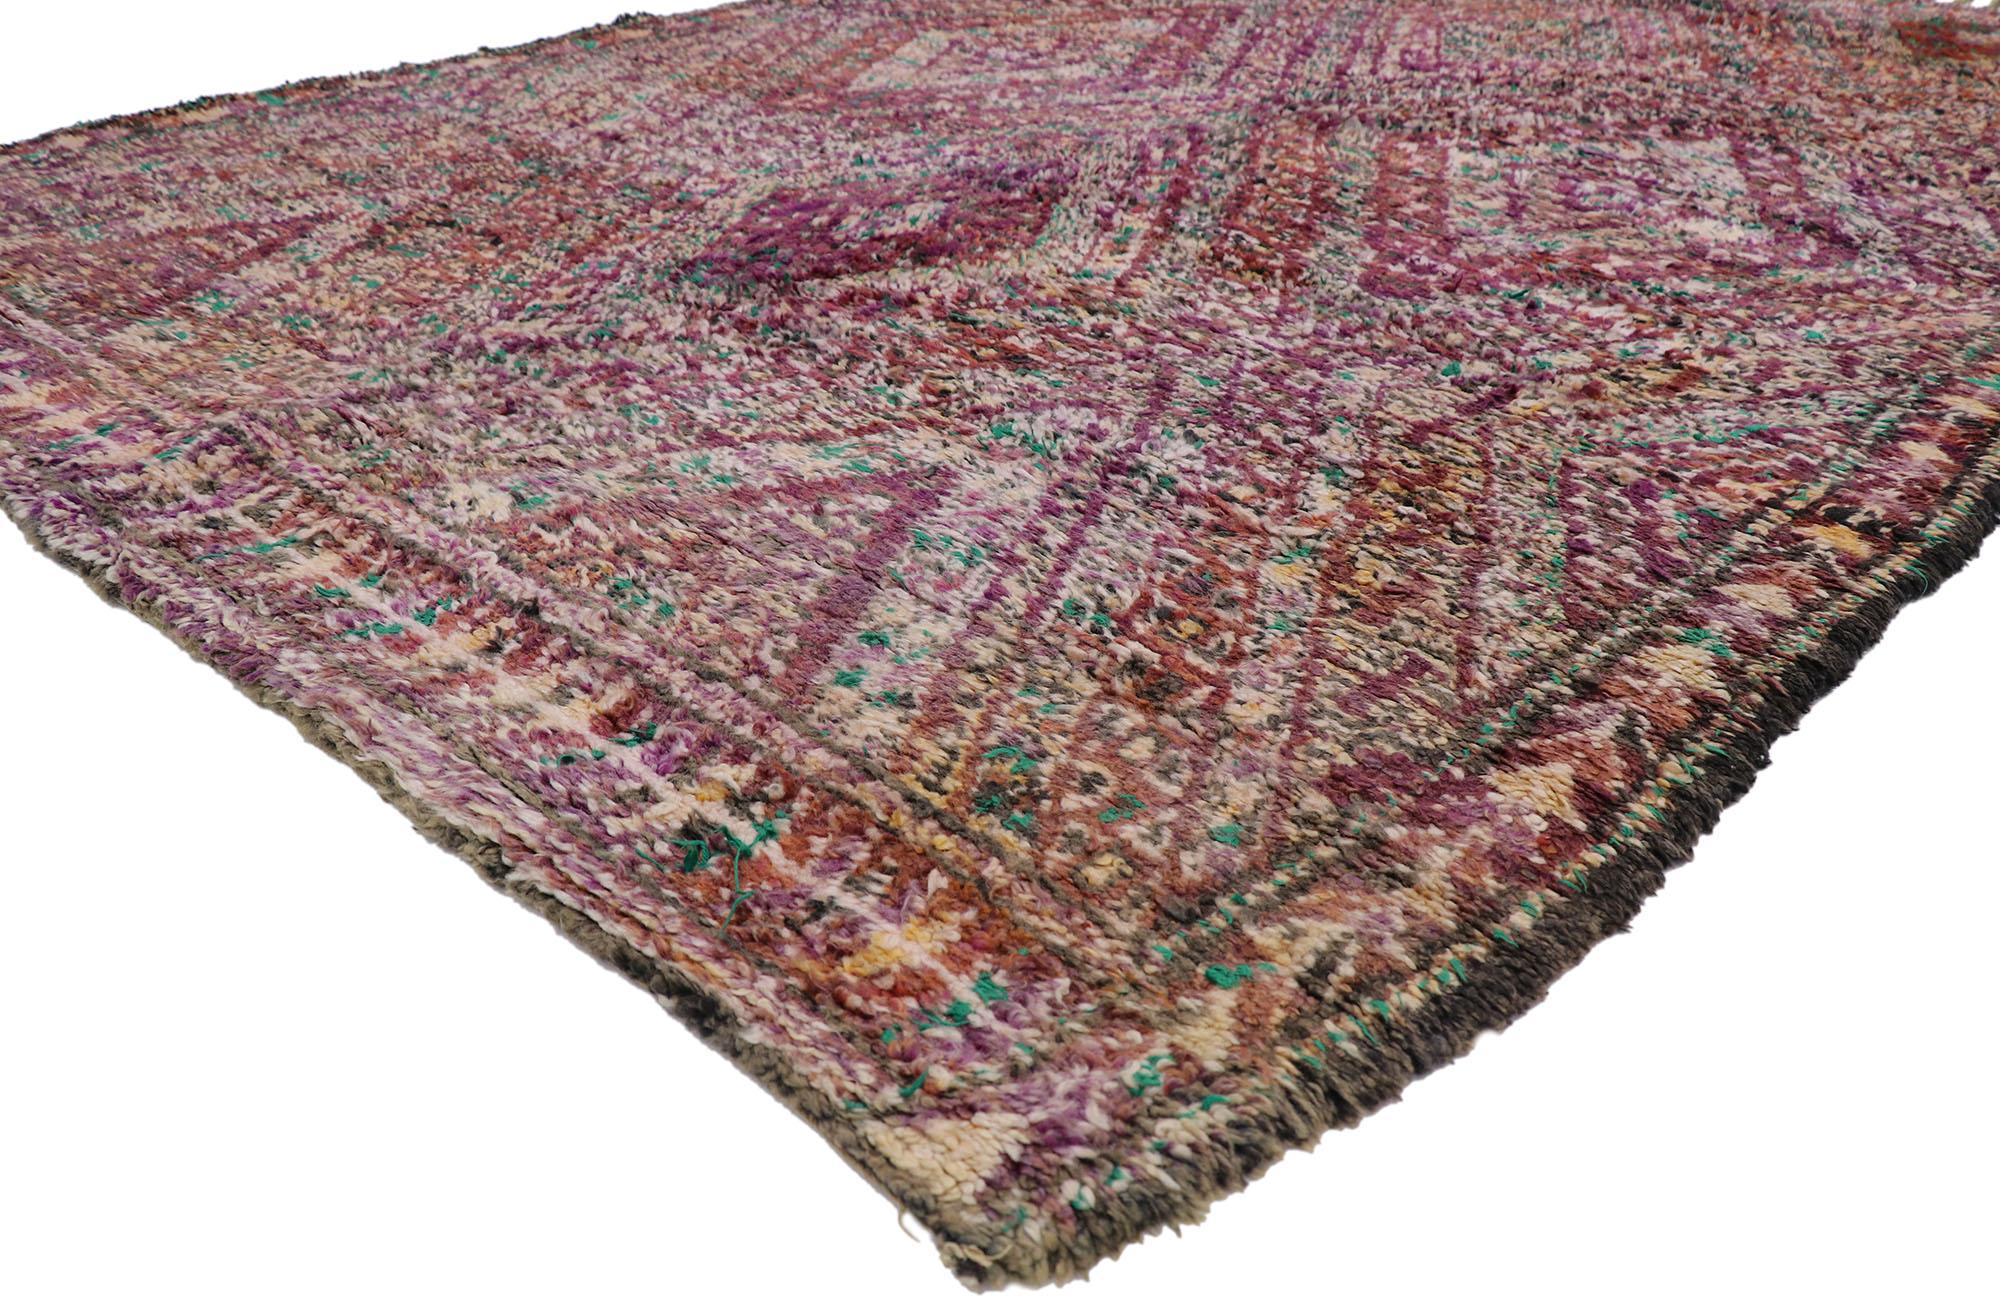 21222 Vintage Berber Beni M'Guild Moroccan rug with Bohemian Style 06'10 x 10'08. Showcasing a bold expressive design, incredible detail and texture, this hand knotted wool vintage Berber Beni M'Guild Moroccan rug is a captivating vision of woven